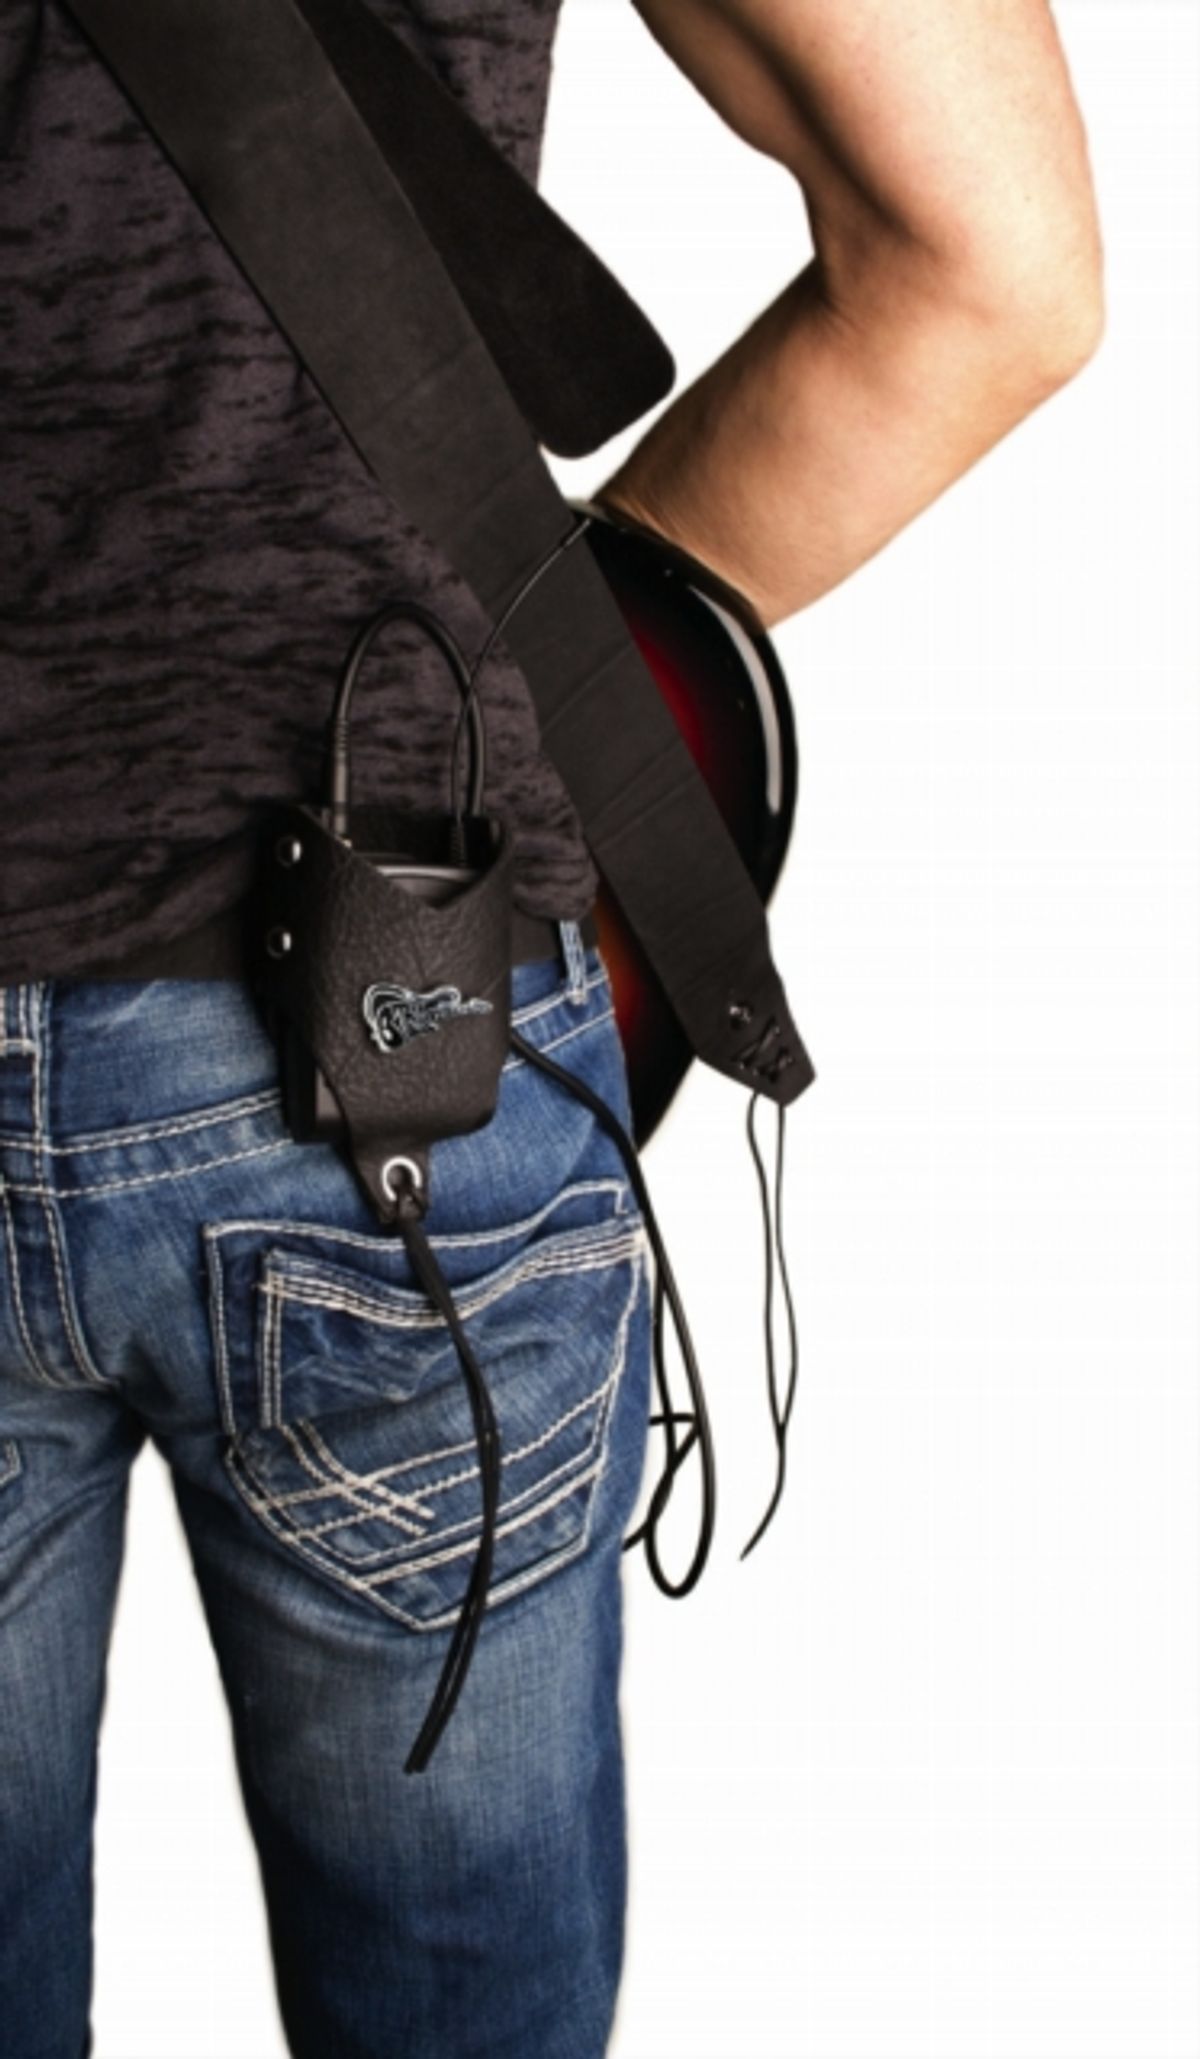 Bitchstraps Announce New Wireless Holster